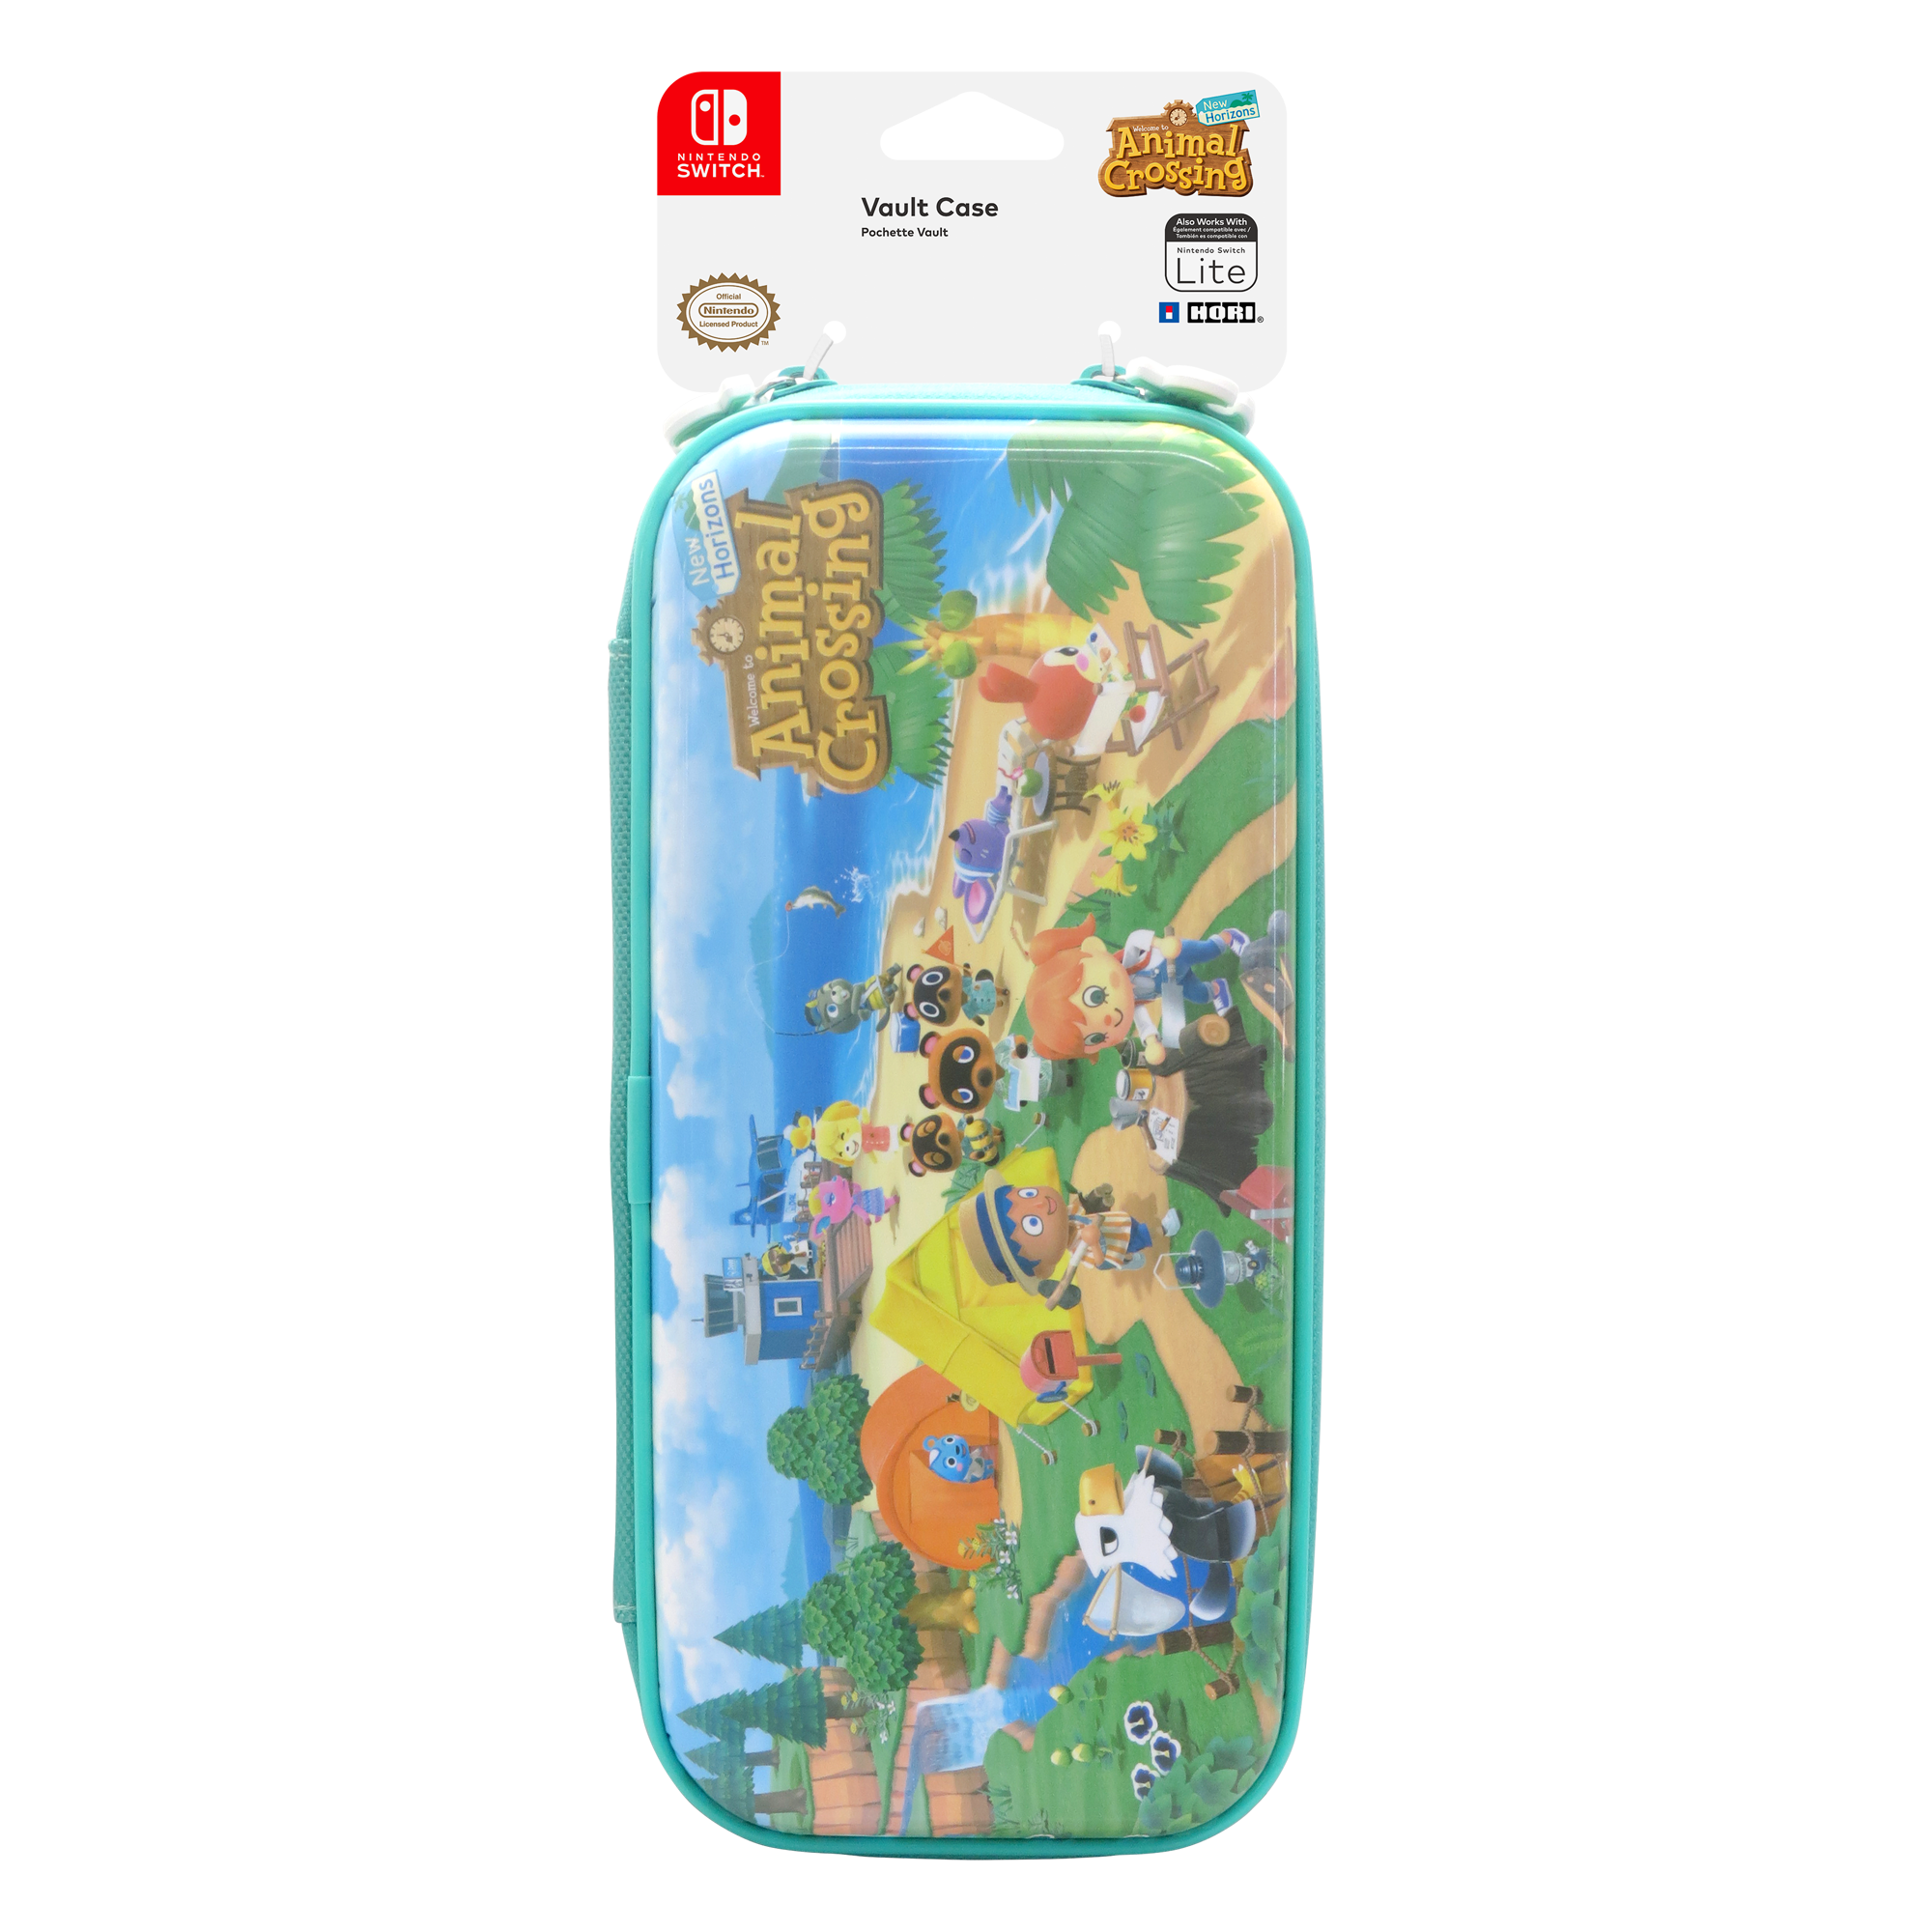 animal crossing switch switch lite